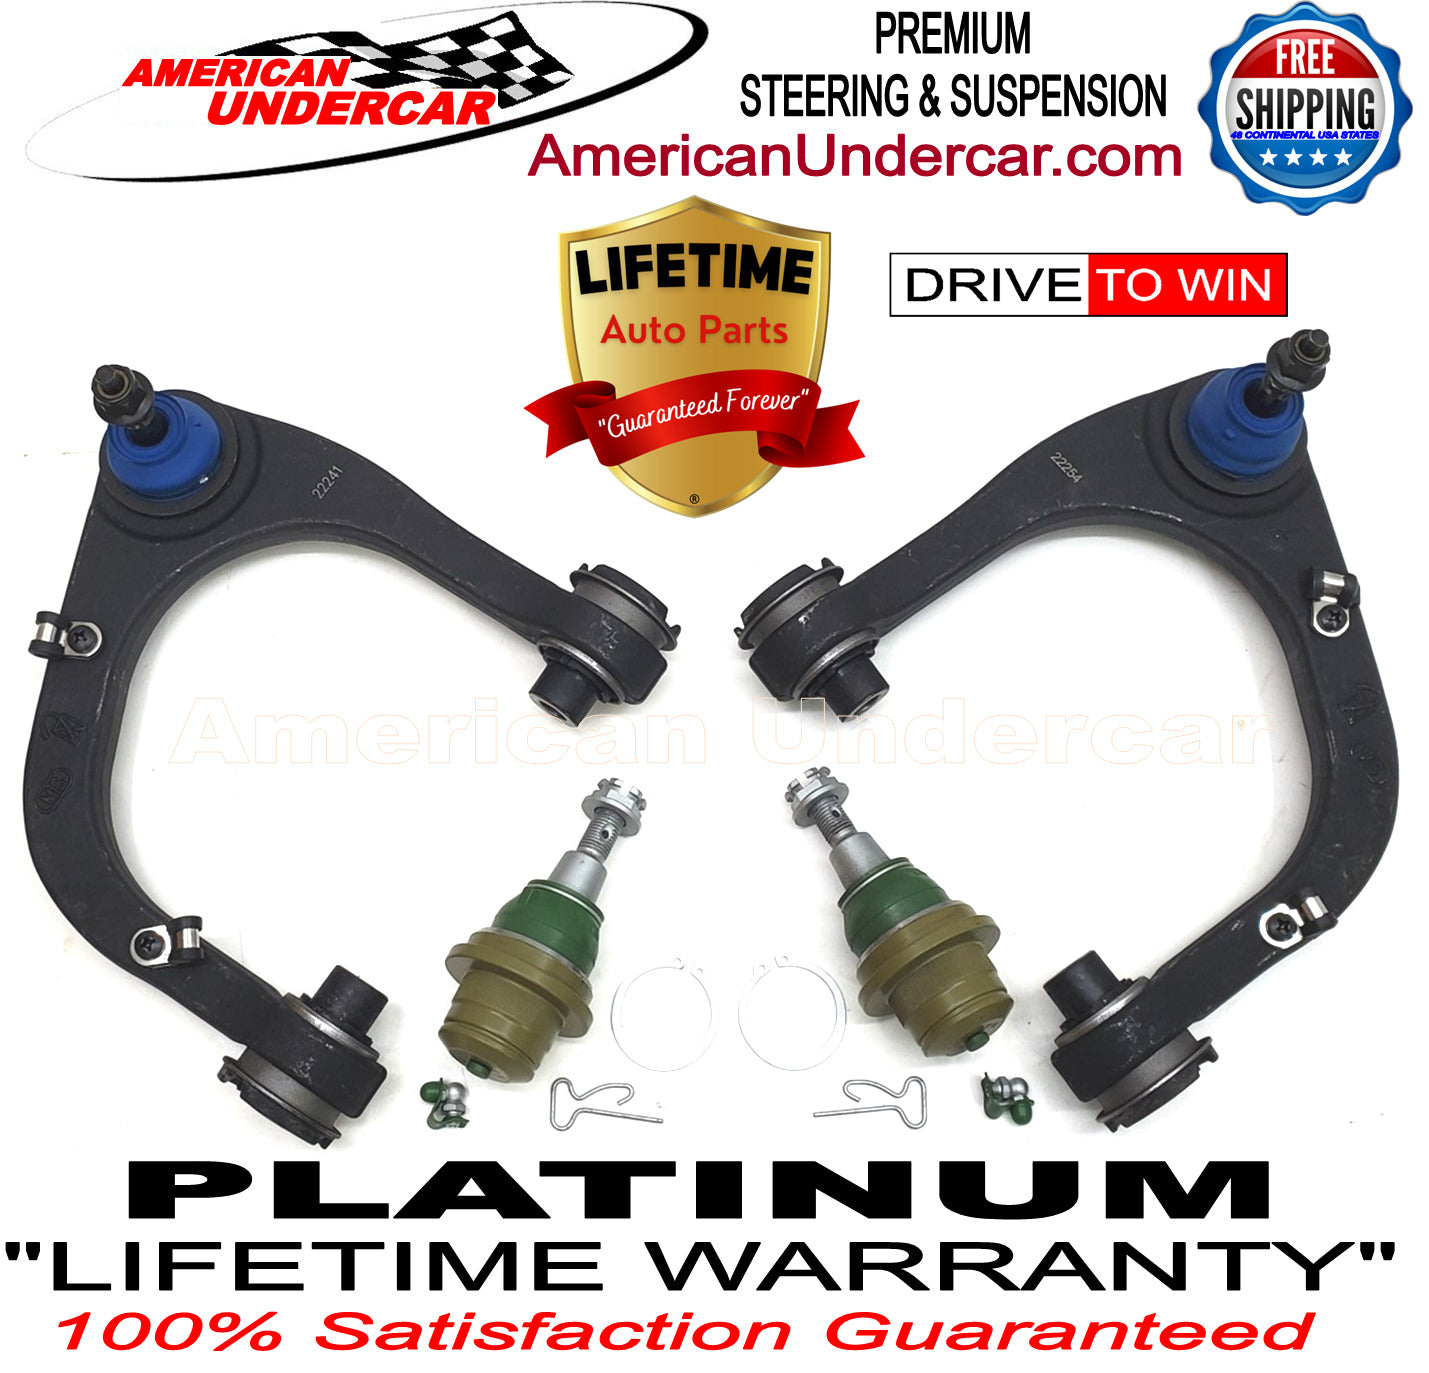 Lifetime Control Arm Ball Joint Suspension Steering Kit for 2019-2022 Ford Ranger 4x4